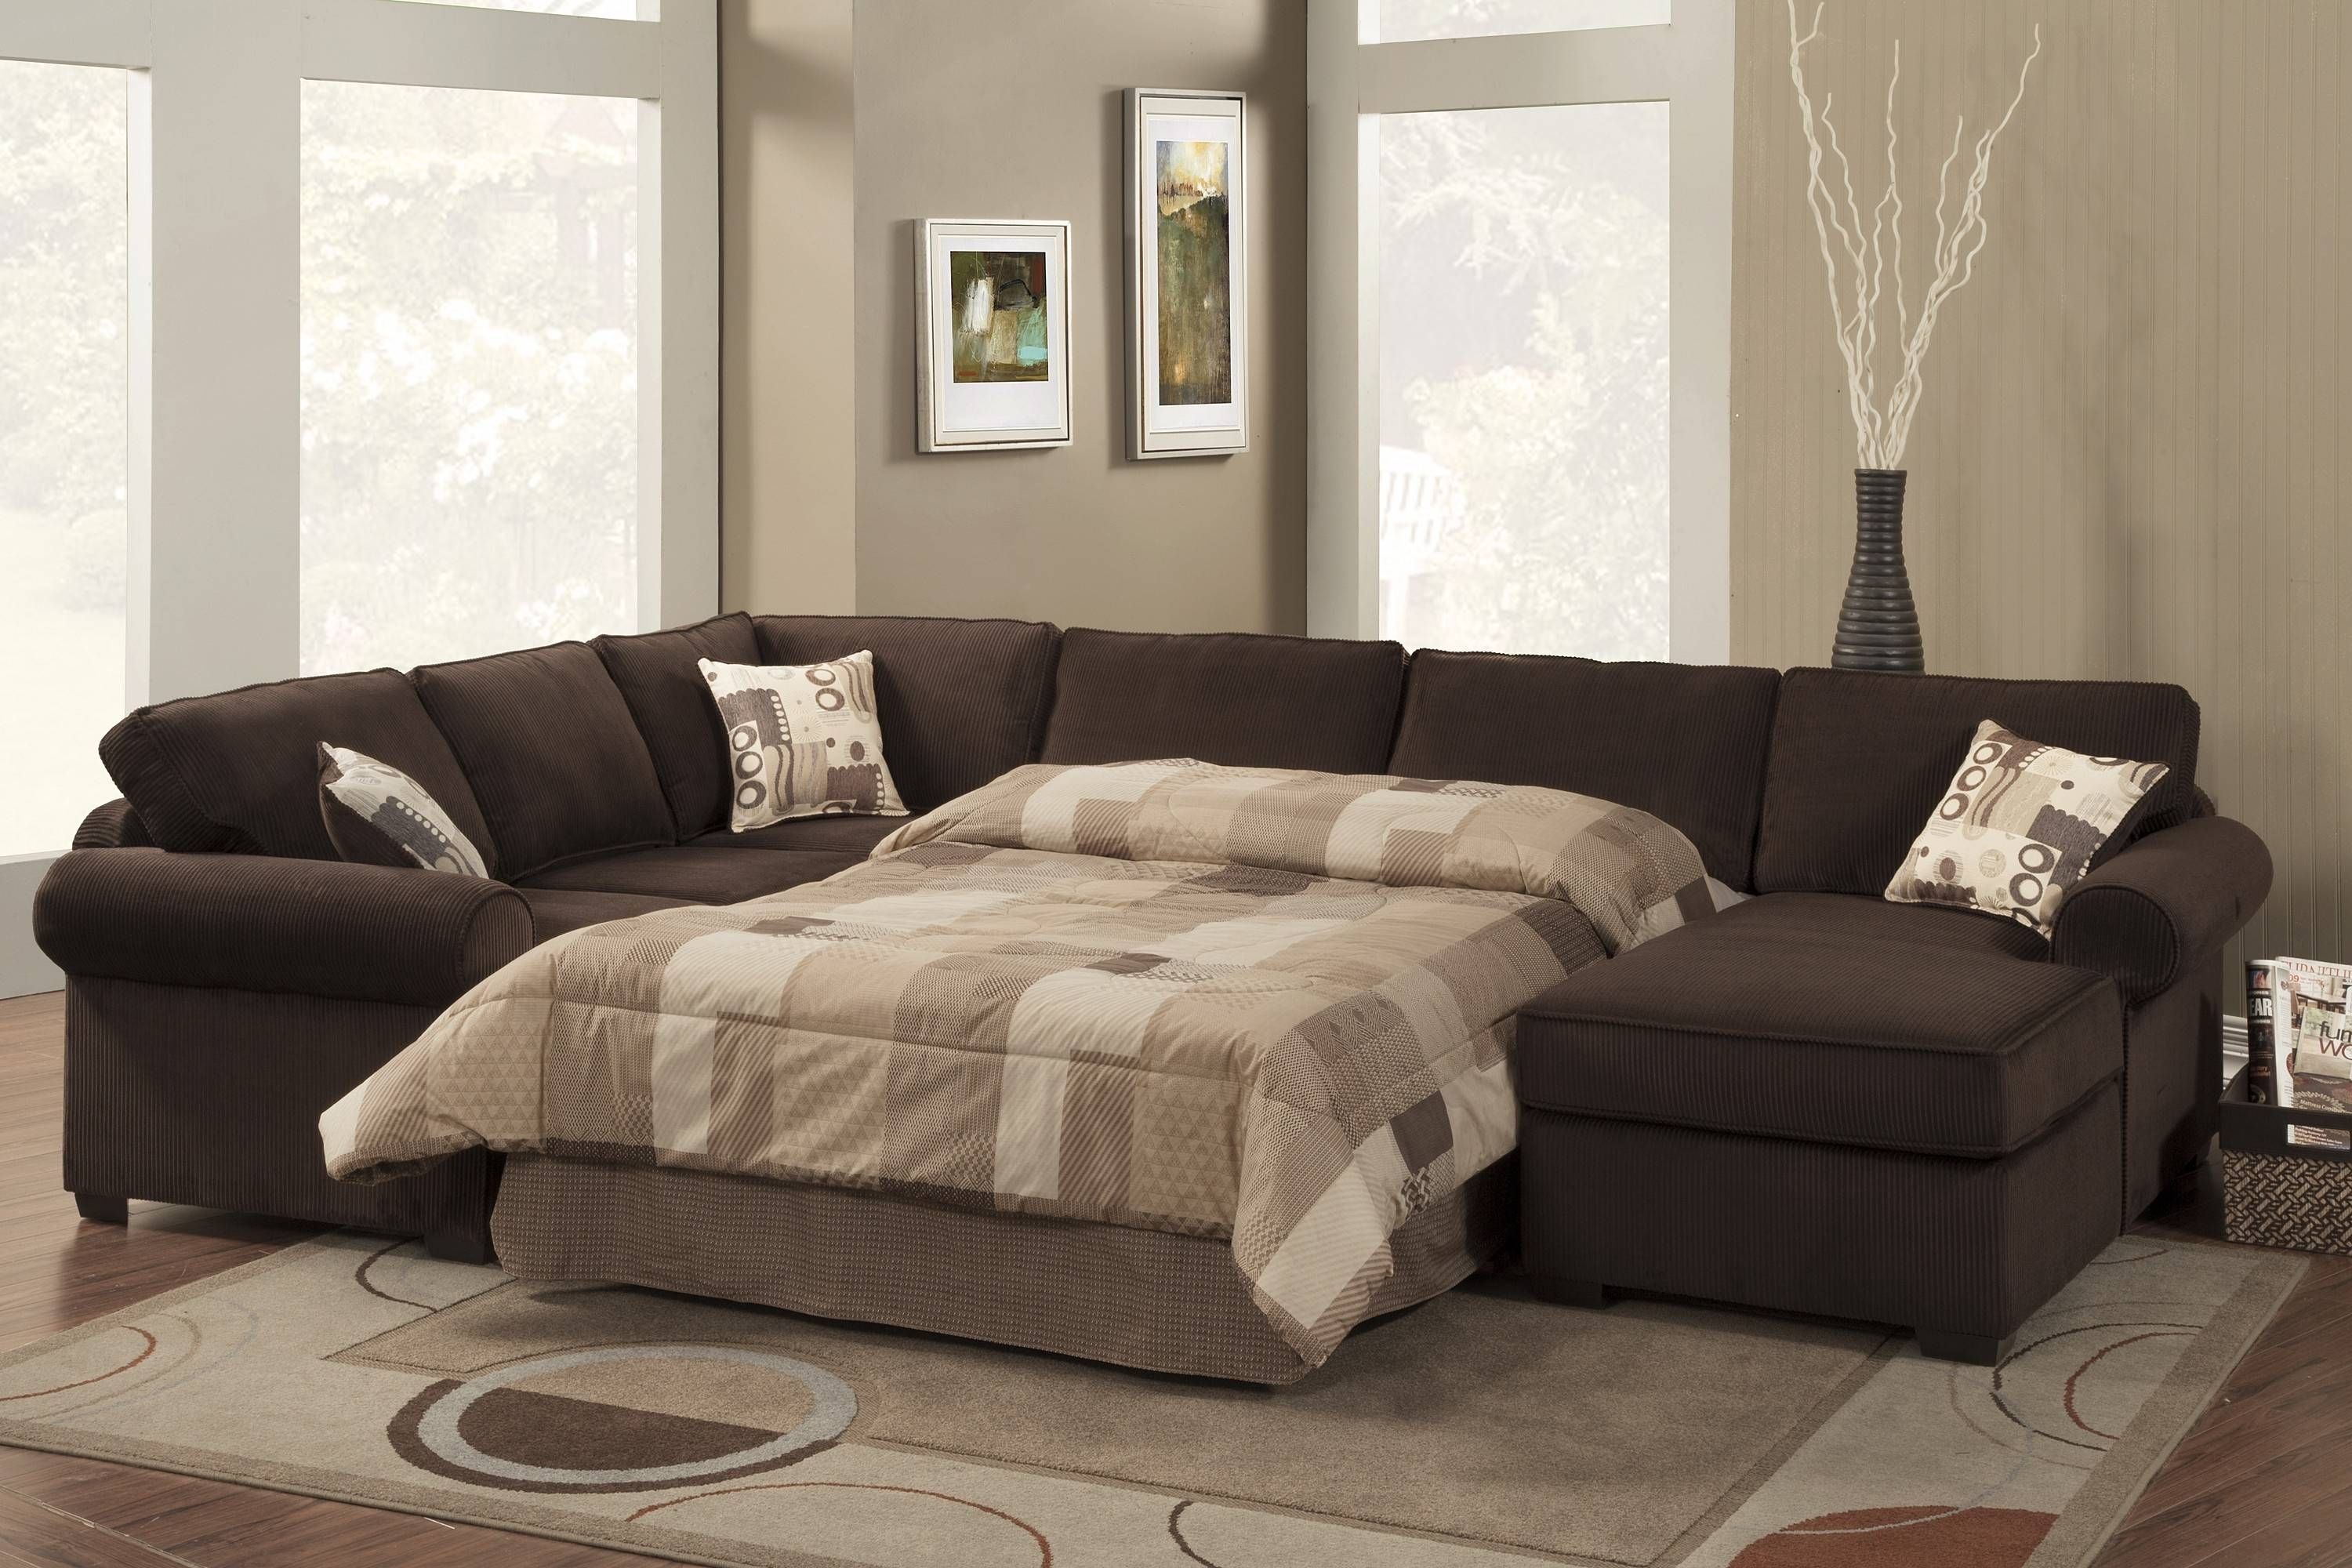 Beautiful Cozy Sectional Sofas 54 About Remodel Intended For Throughout Cozy Sectional Sofas (Photo 9 of 30)